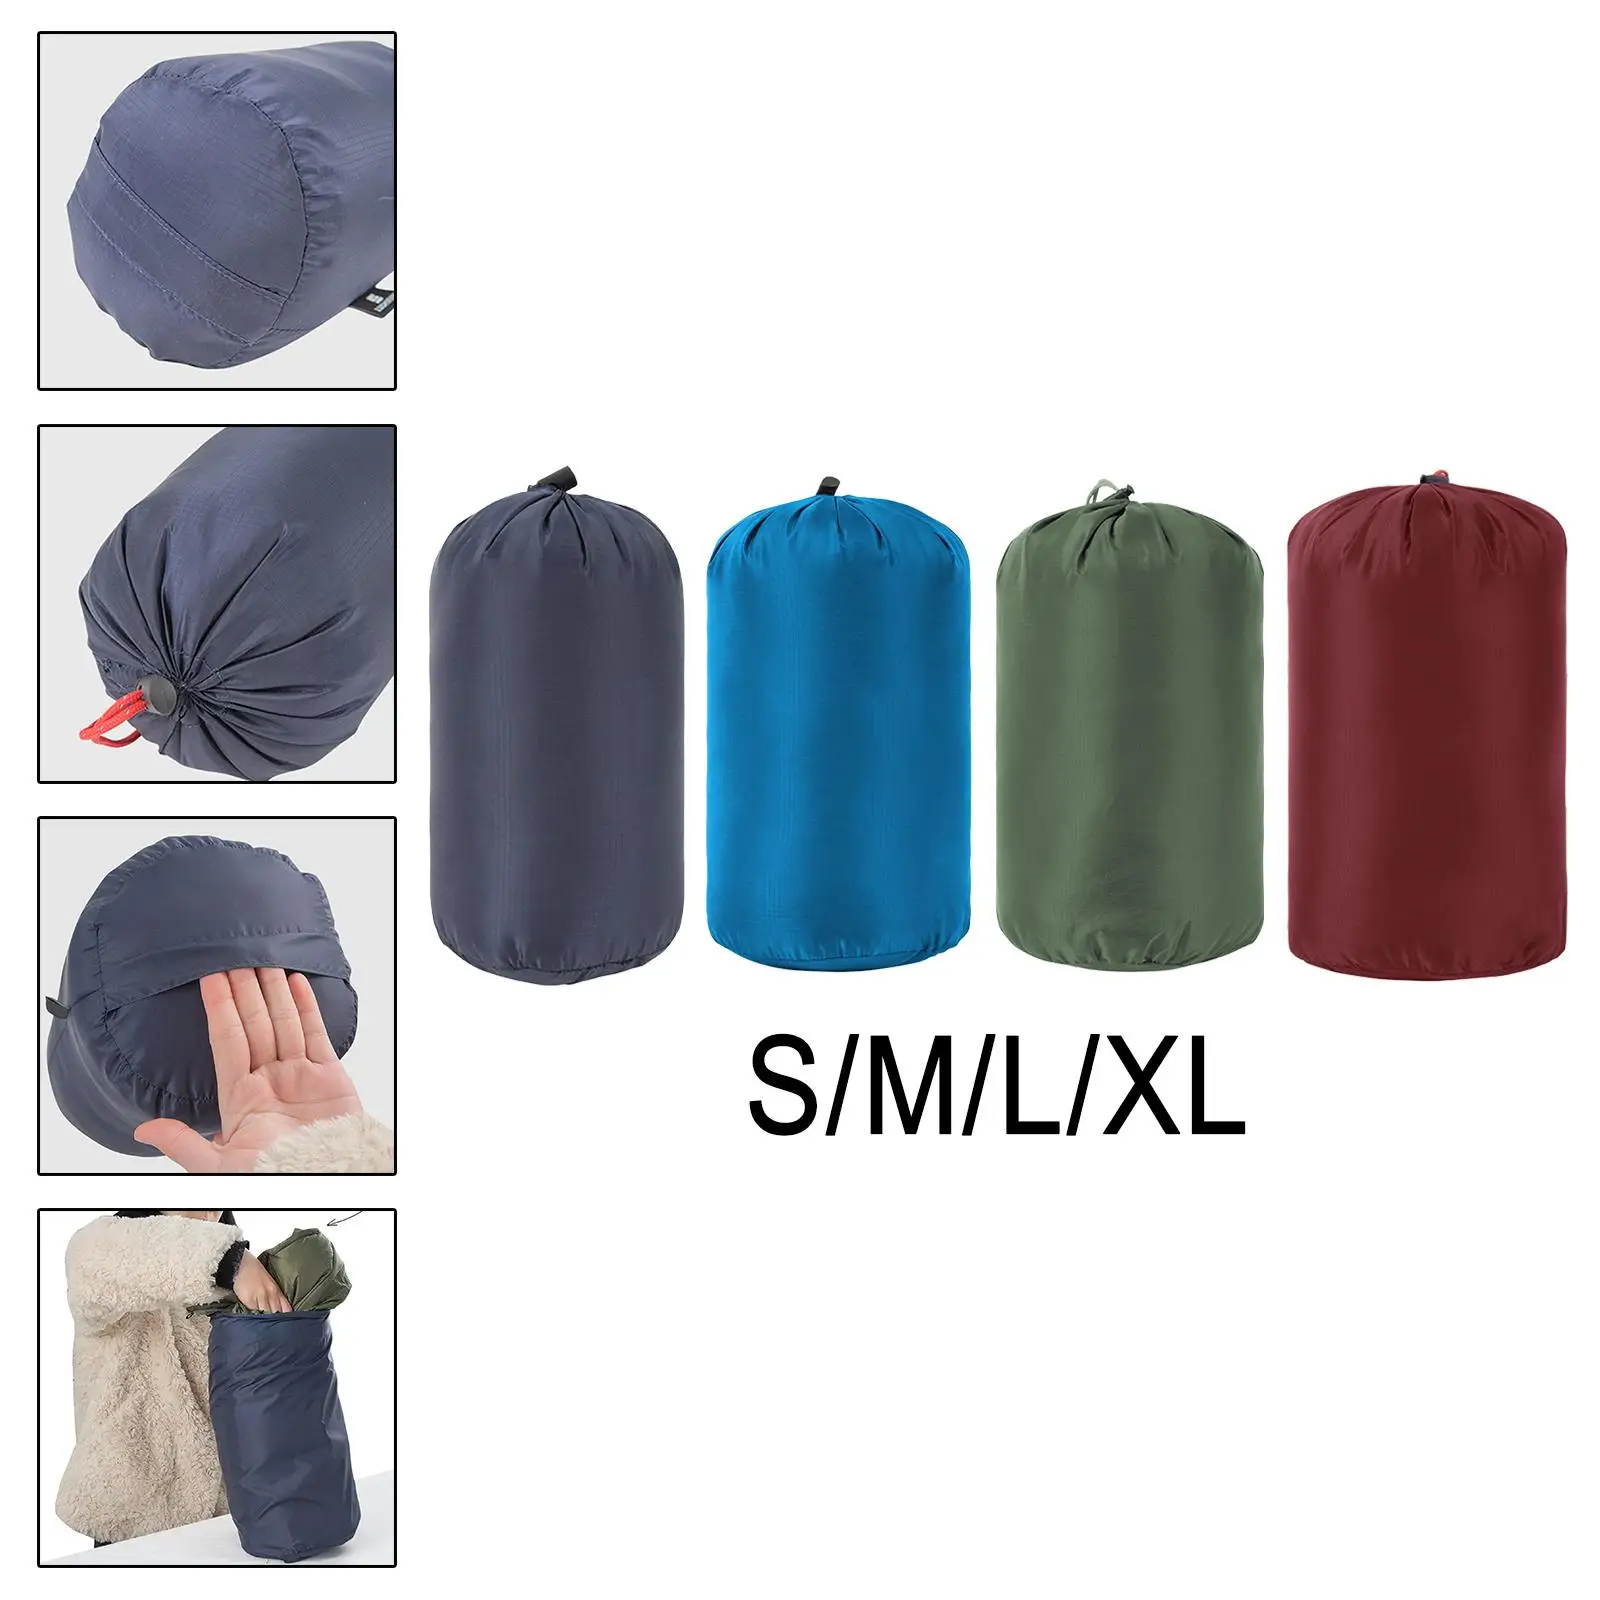 Nylon Compression Stuff Sack, Lightweight Sleeping Bag Compression Sack Great for Backpacking, Hiking, and Camping